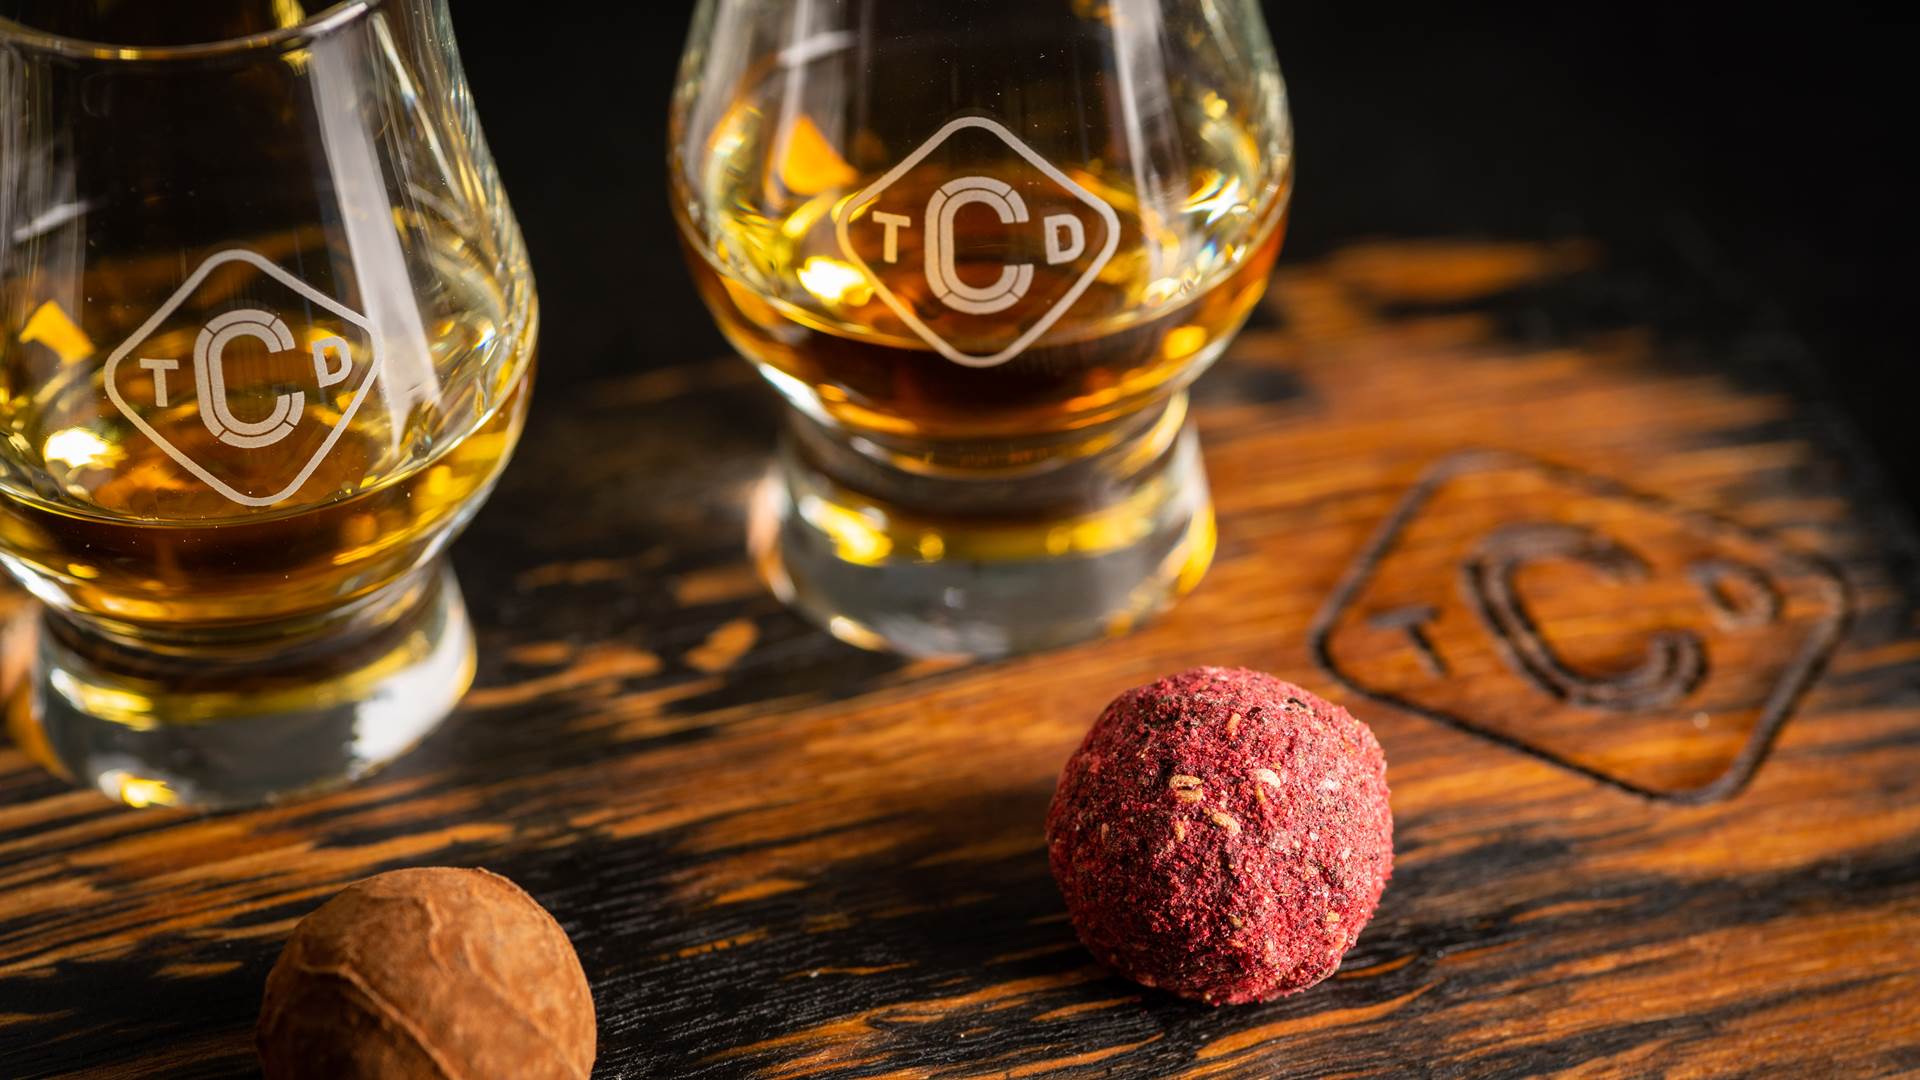 Close up of whisky & chocolate pairing, includes dram of whisky and round coated pink truffle chocolate